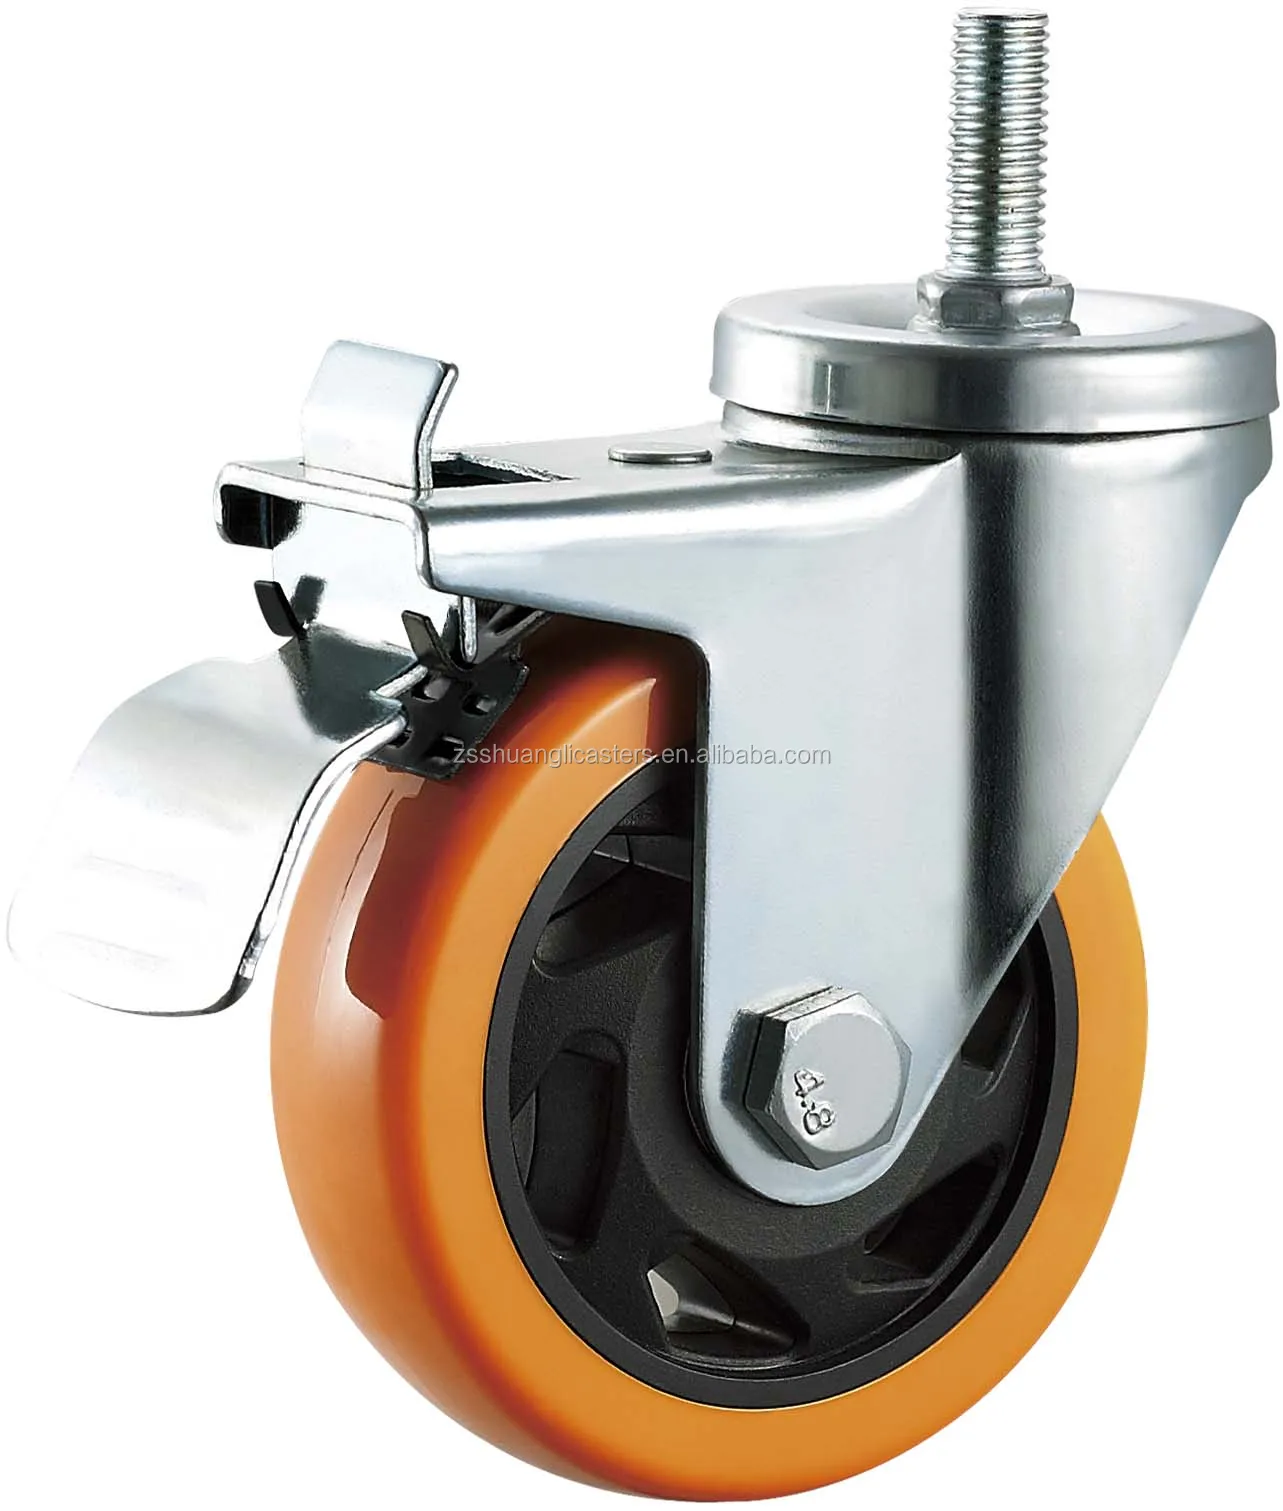 Cart Wheels And Axle Cart Wheels And Axle Suppliers and